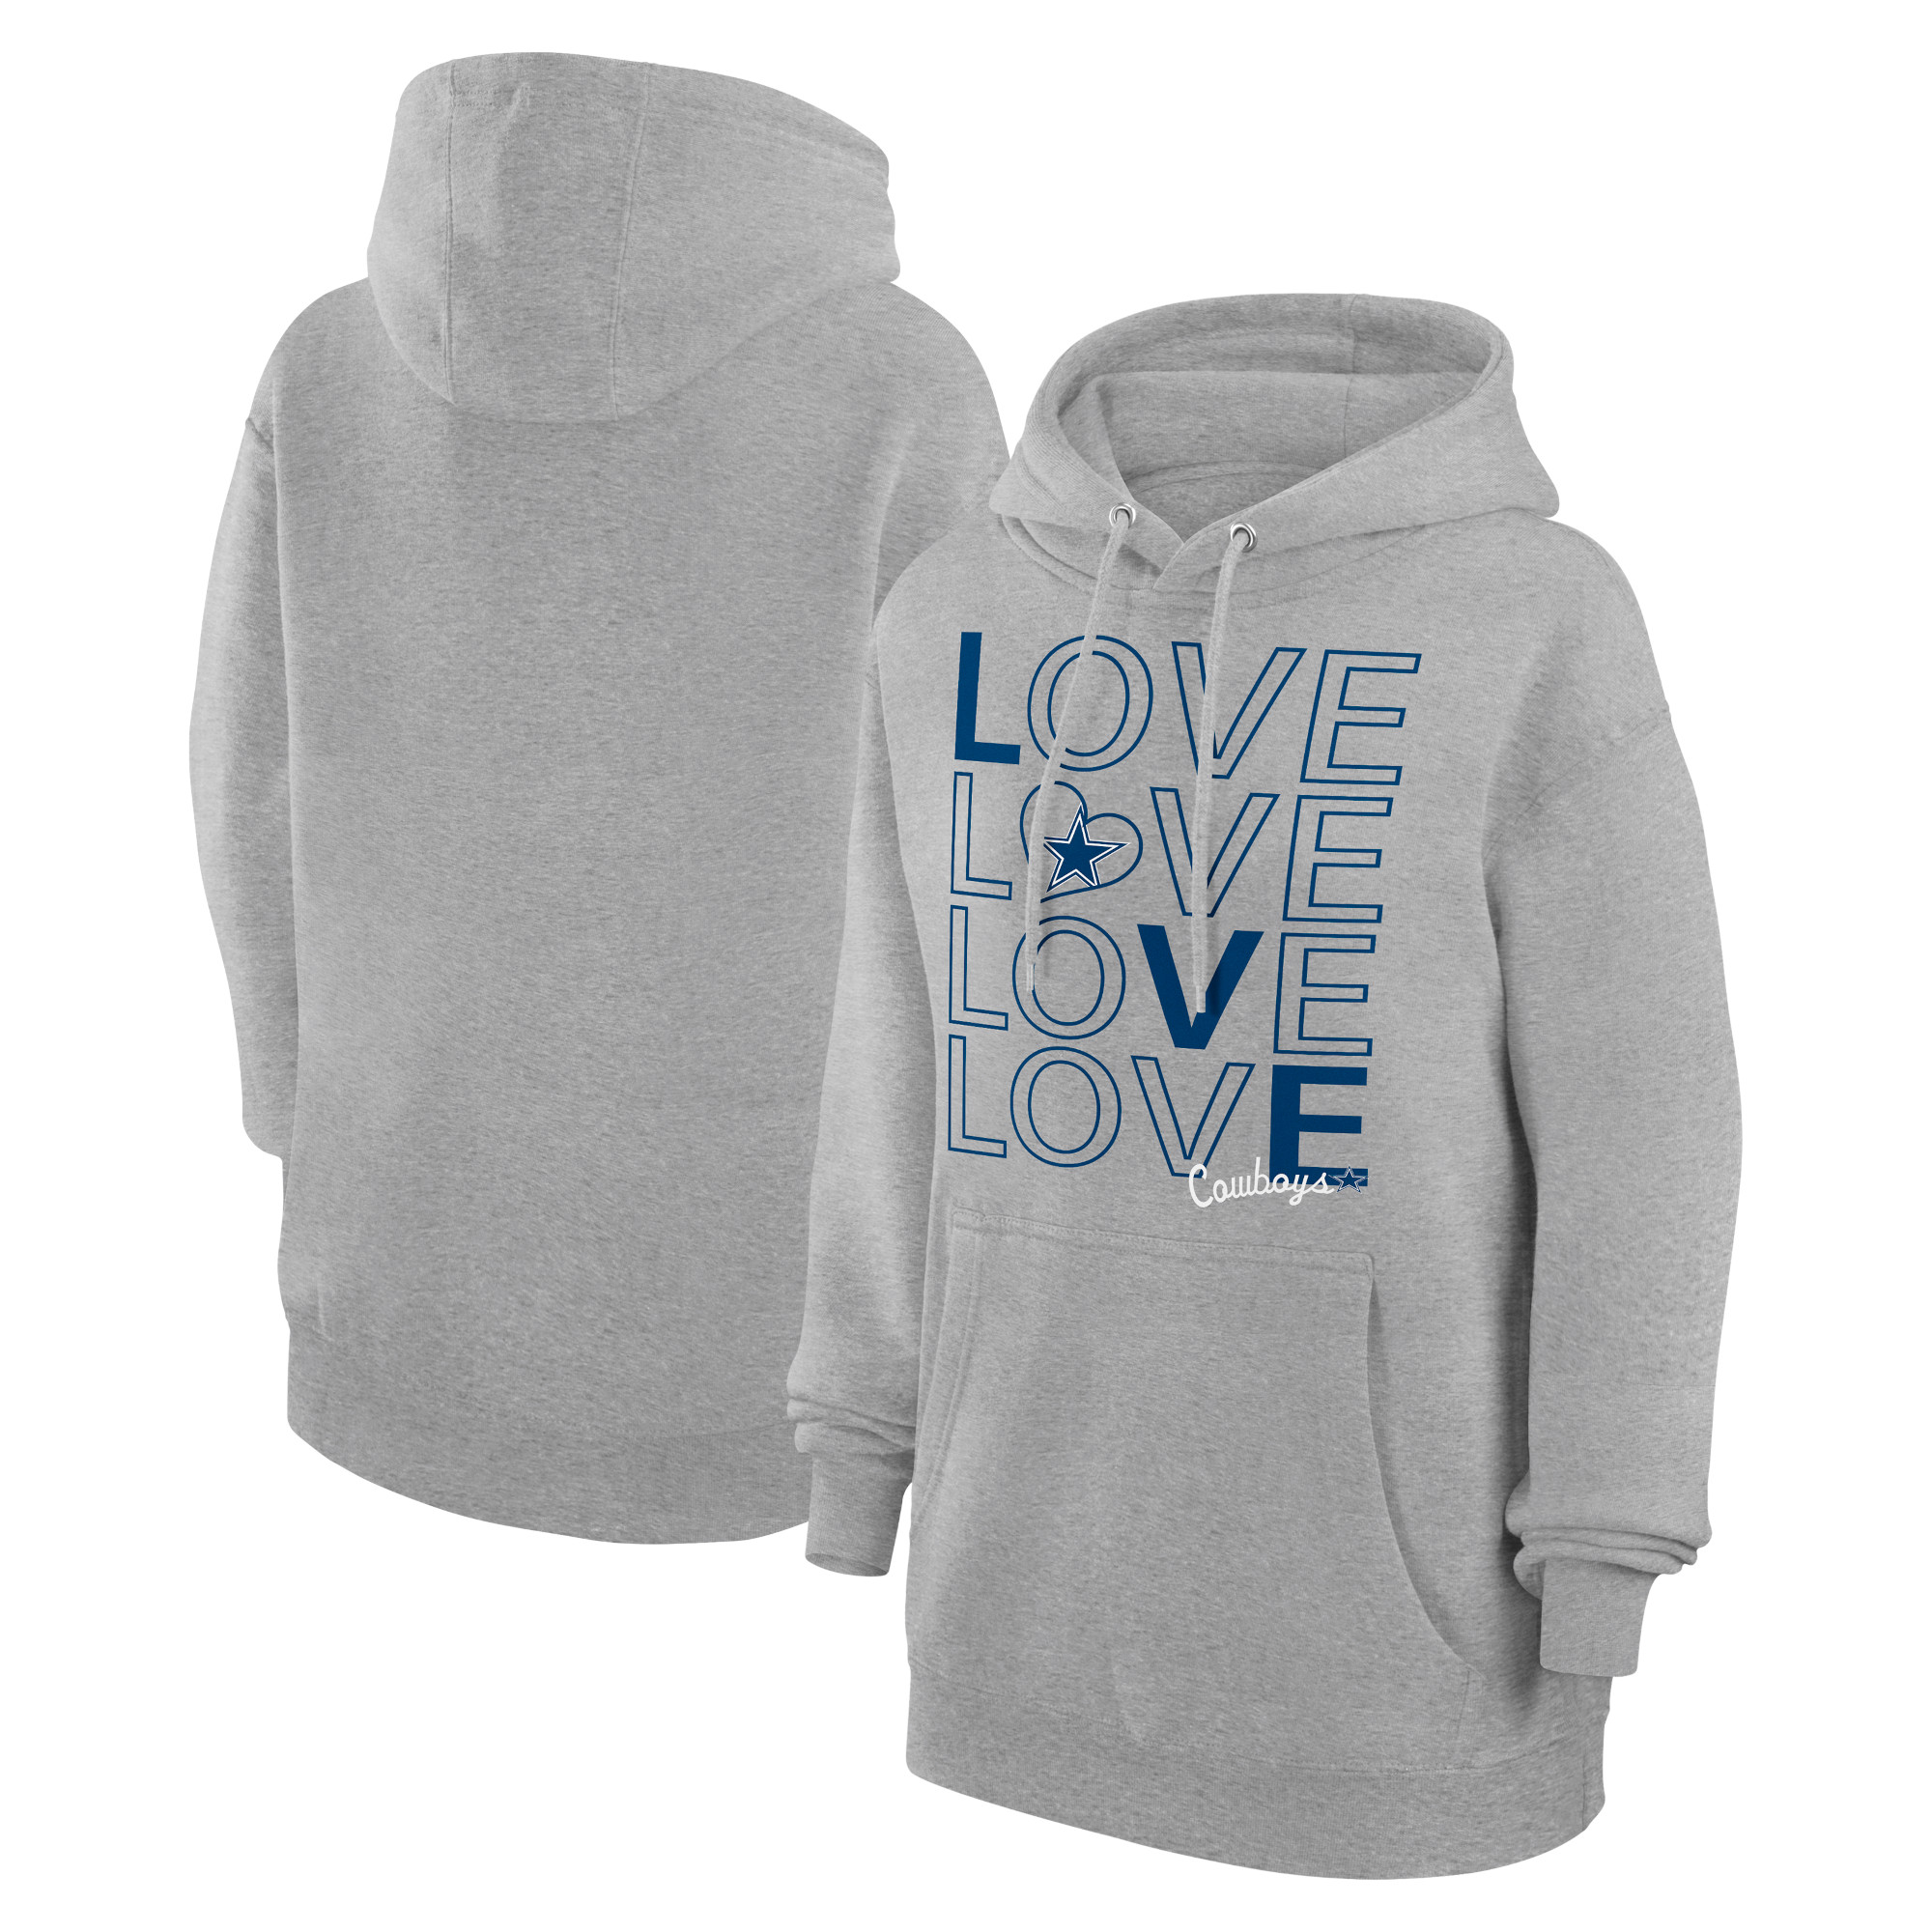 Women's G-III 4Her by Carl Banks  Heather Gray Dallas Cowboys Love Graphic Pullover Hoodie - image 1 of 3